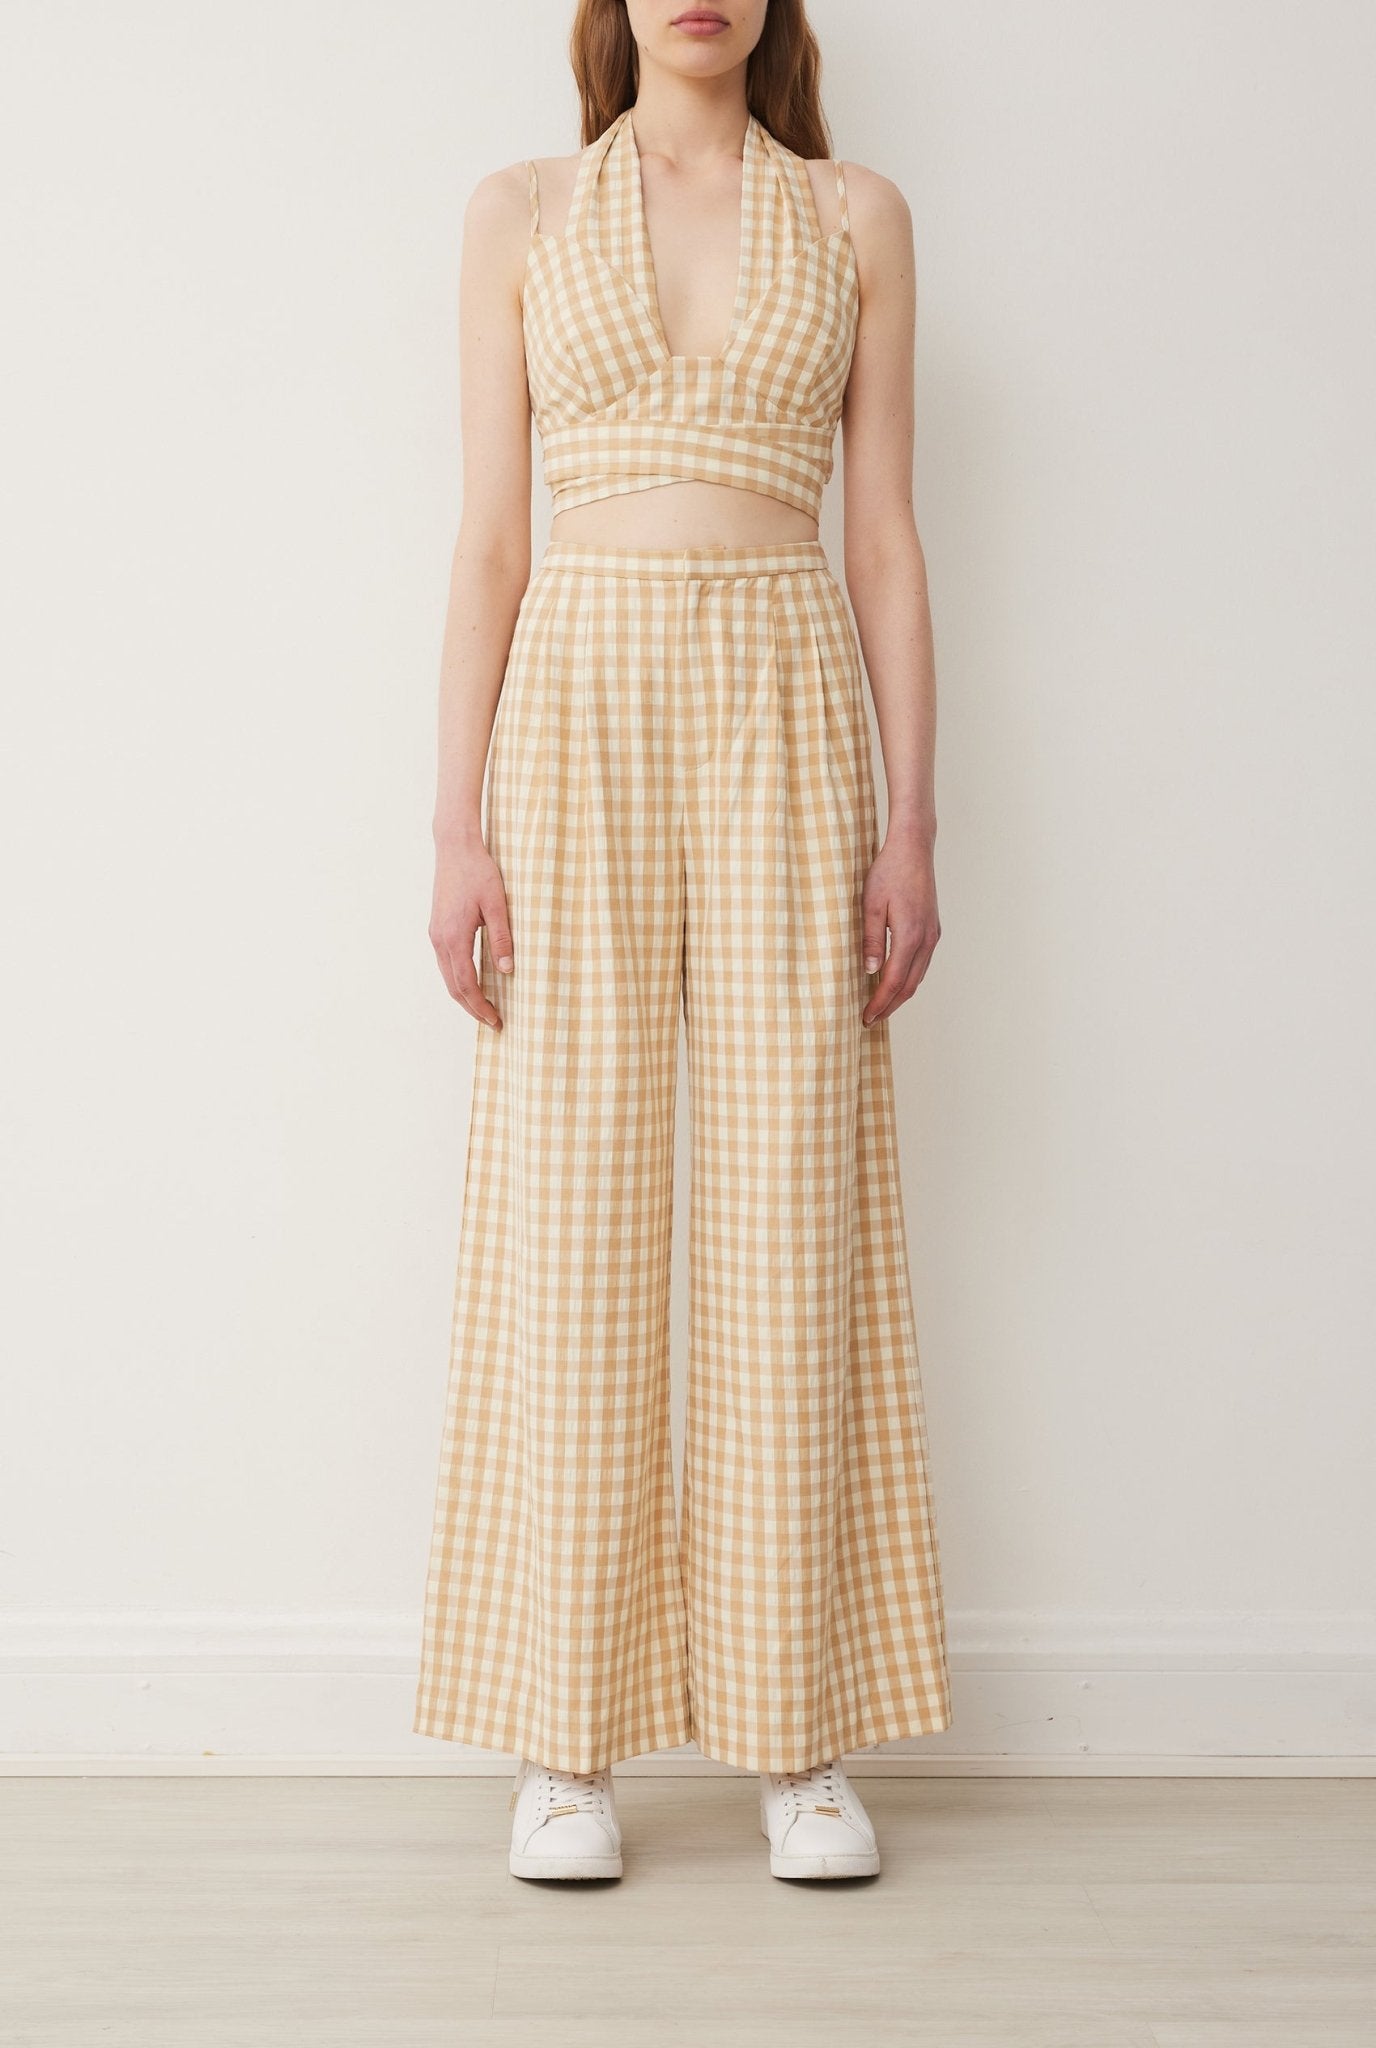 Willow Pant in Neutral Gingham - BOSKEMPER